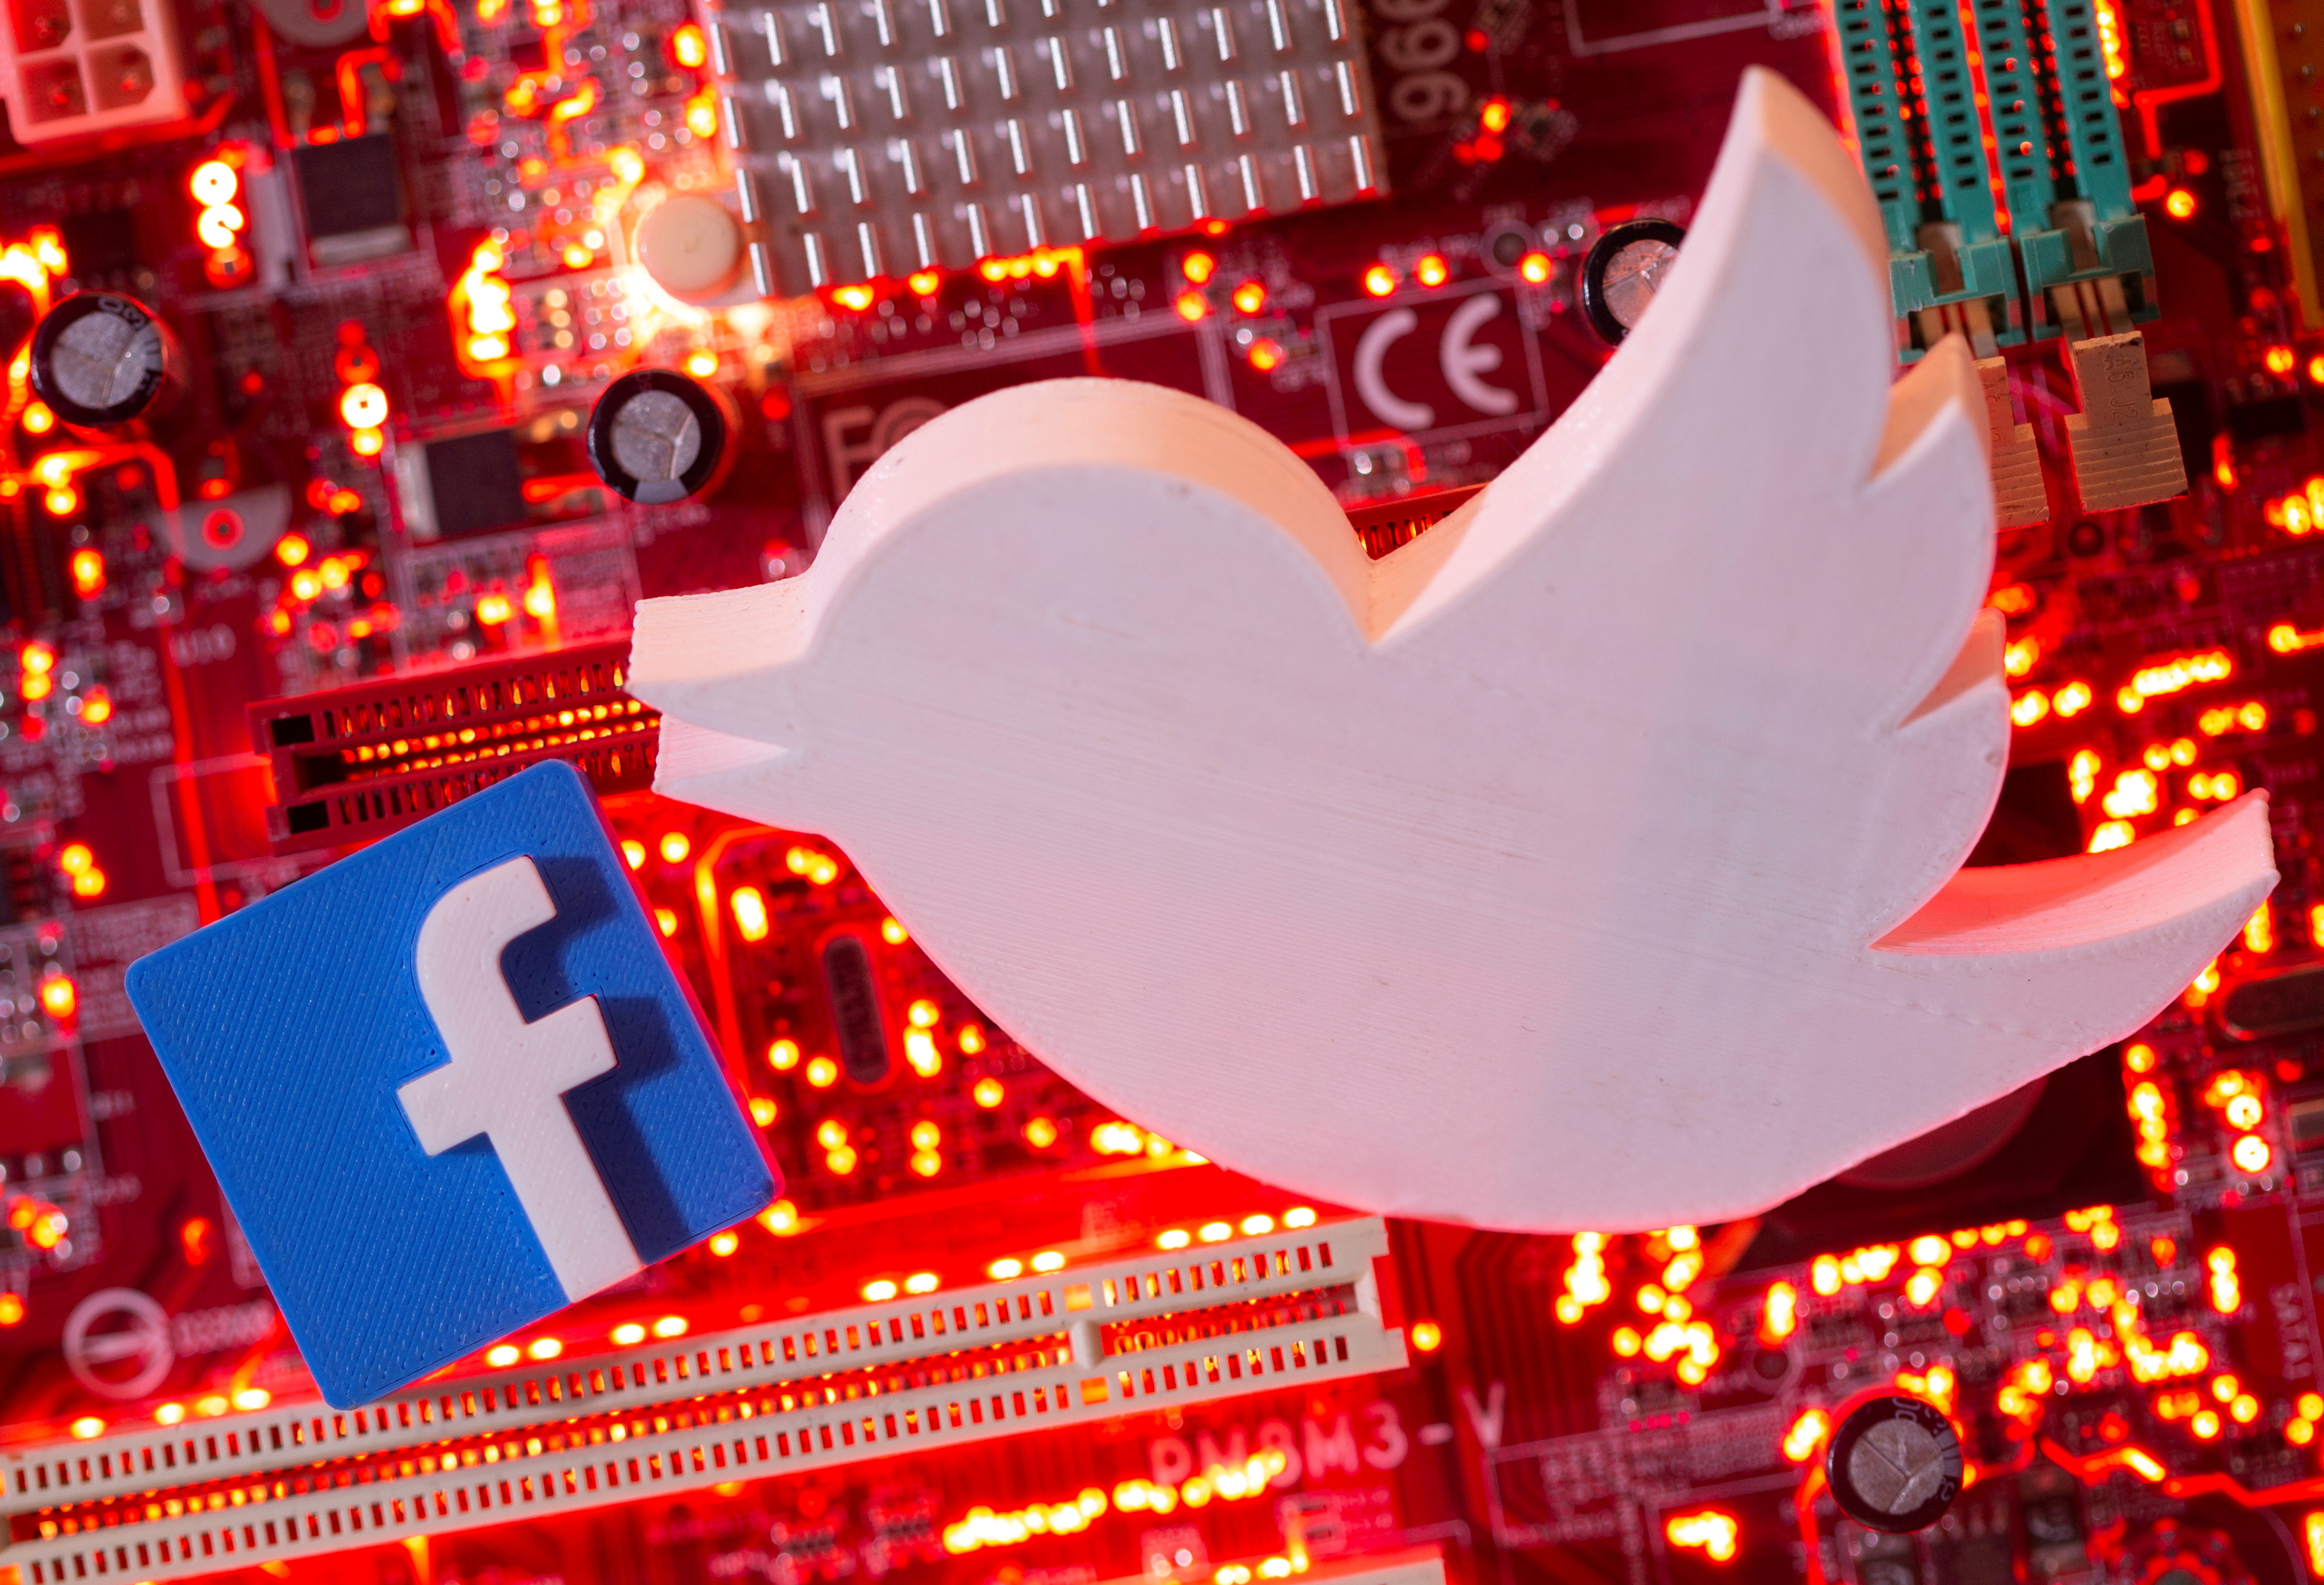 Illustration of 3D printed Facebook and Twitter logos on a computer motherboard